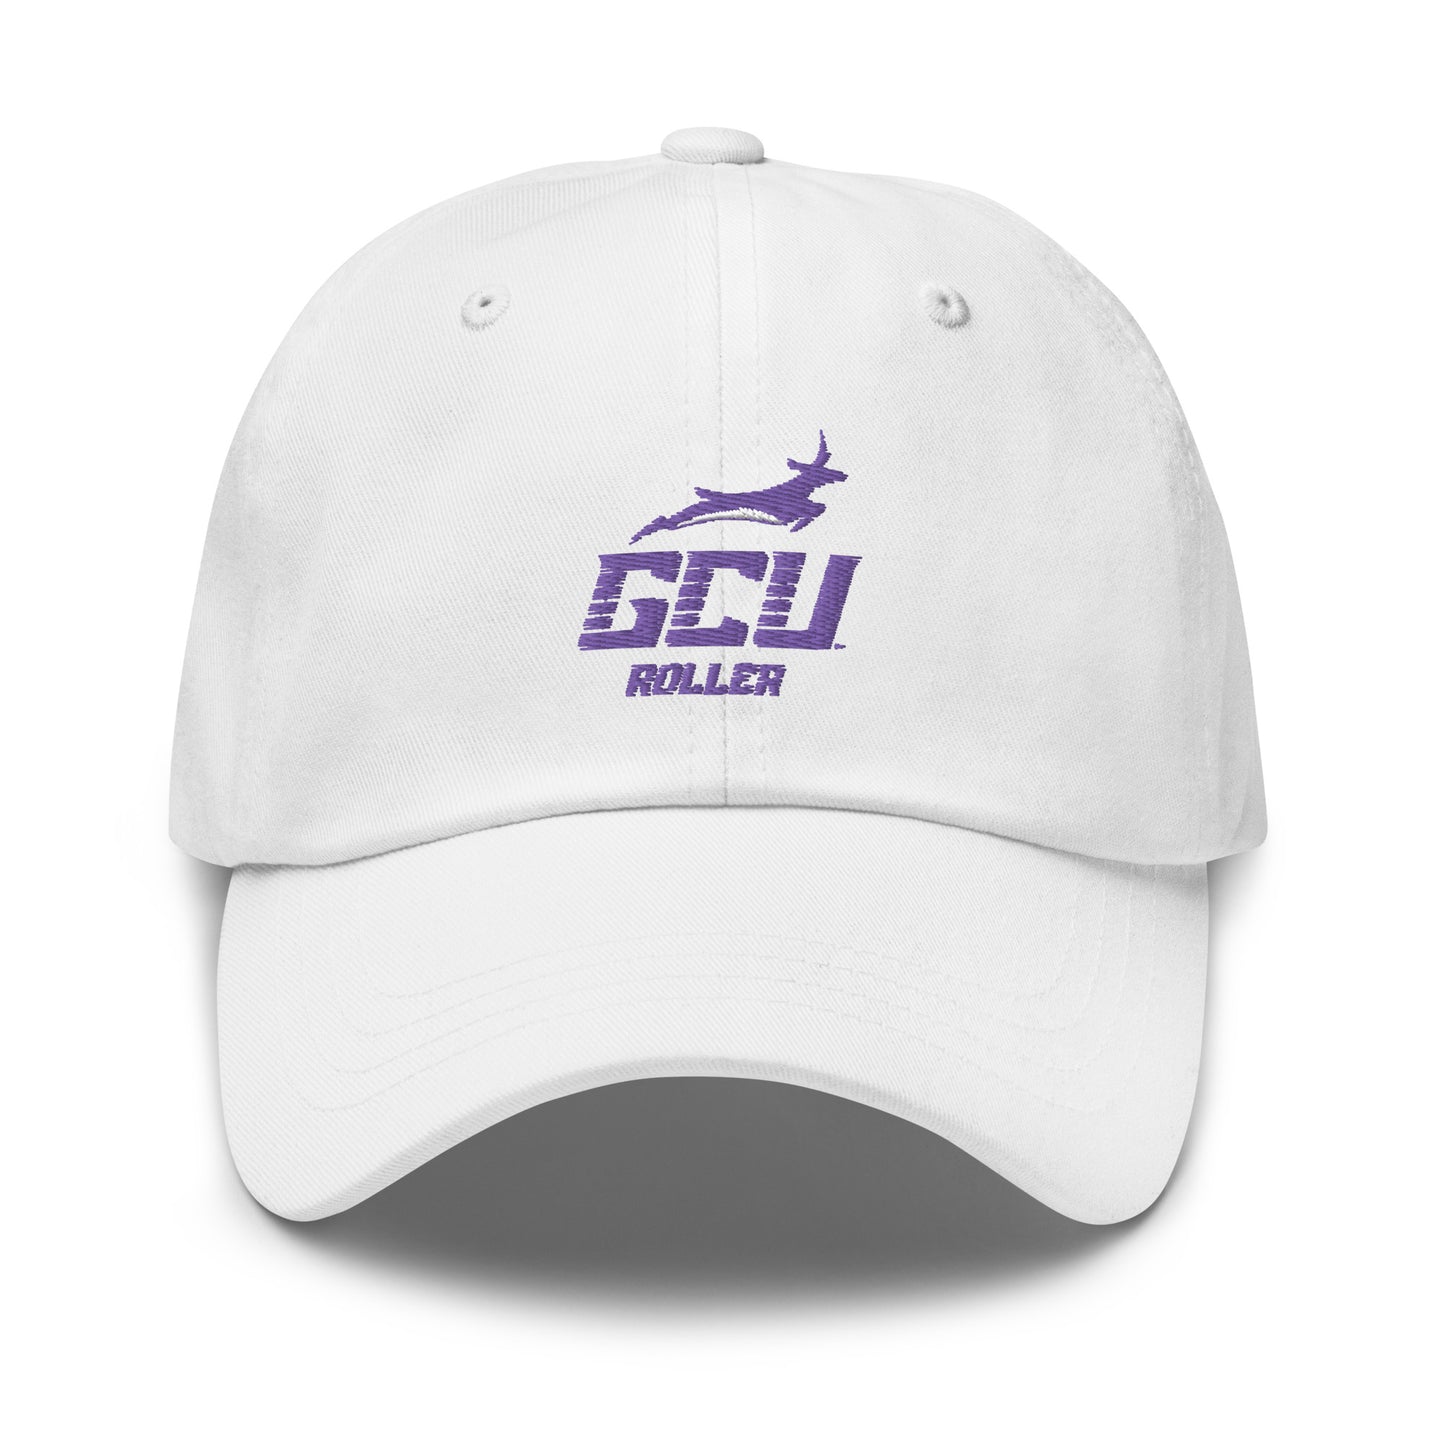 Grand Canyon Dad hat